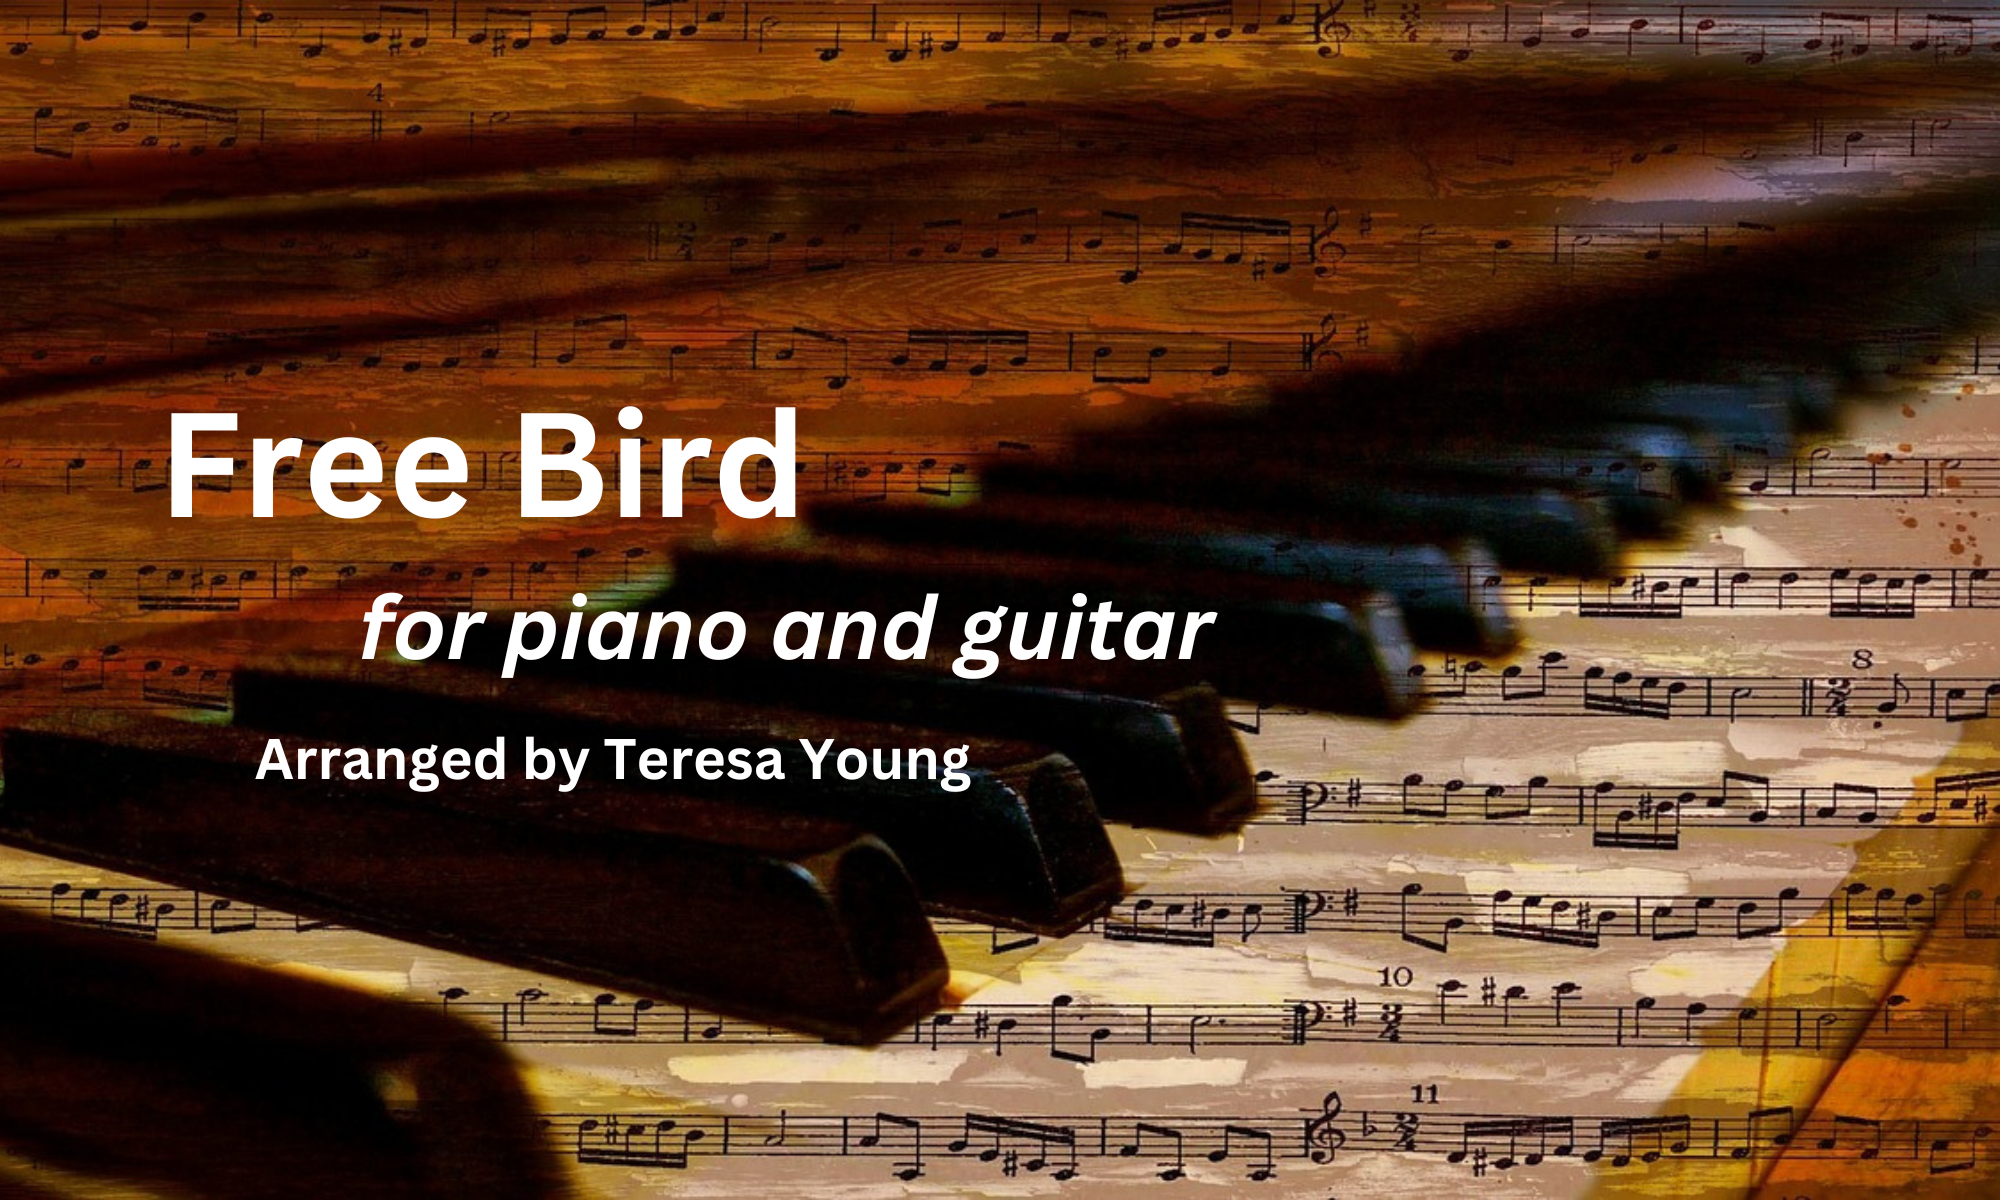 Free Bird, arranged by Teresa Young